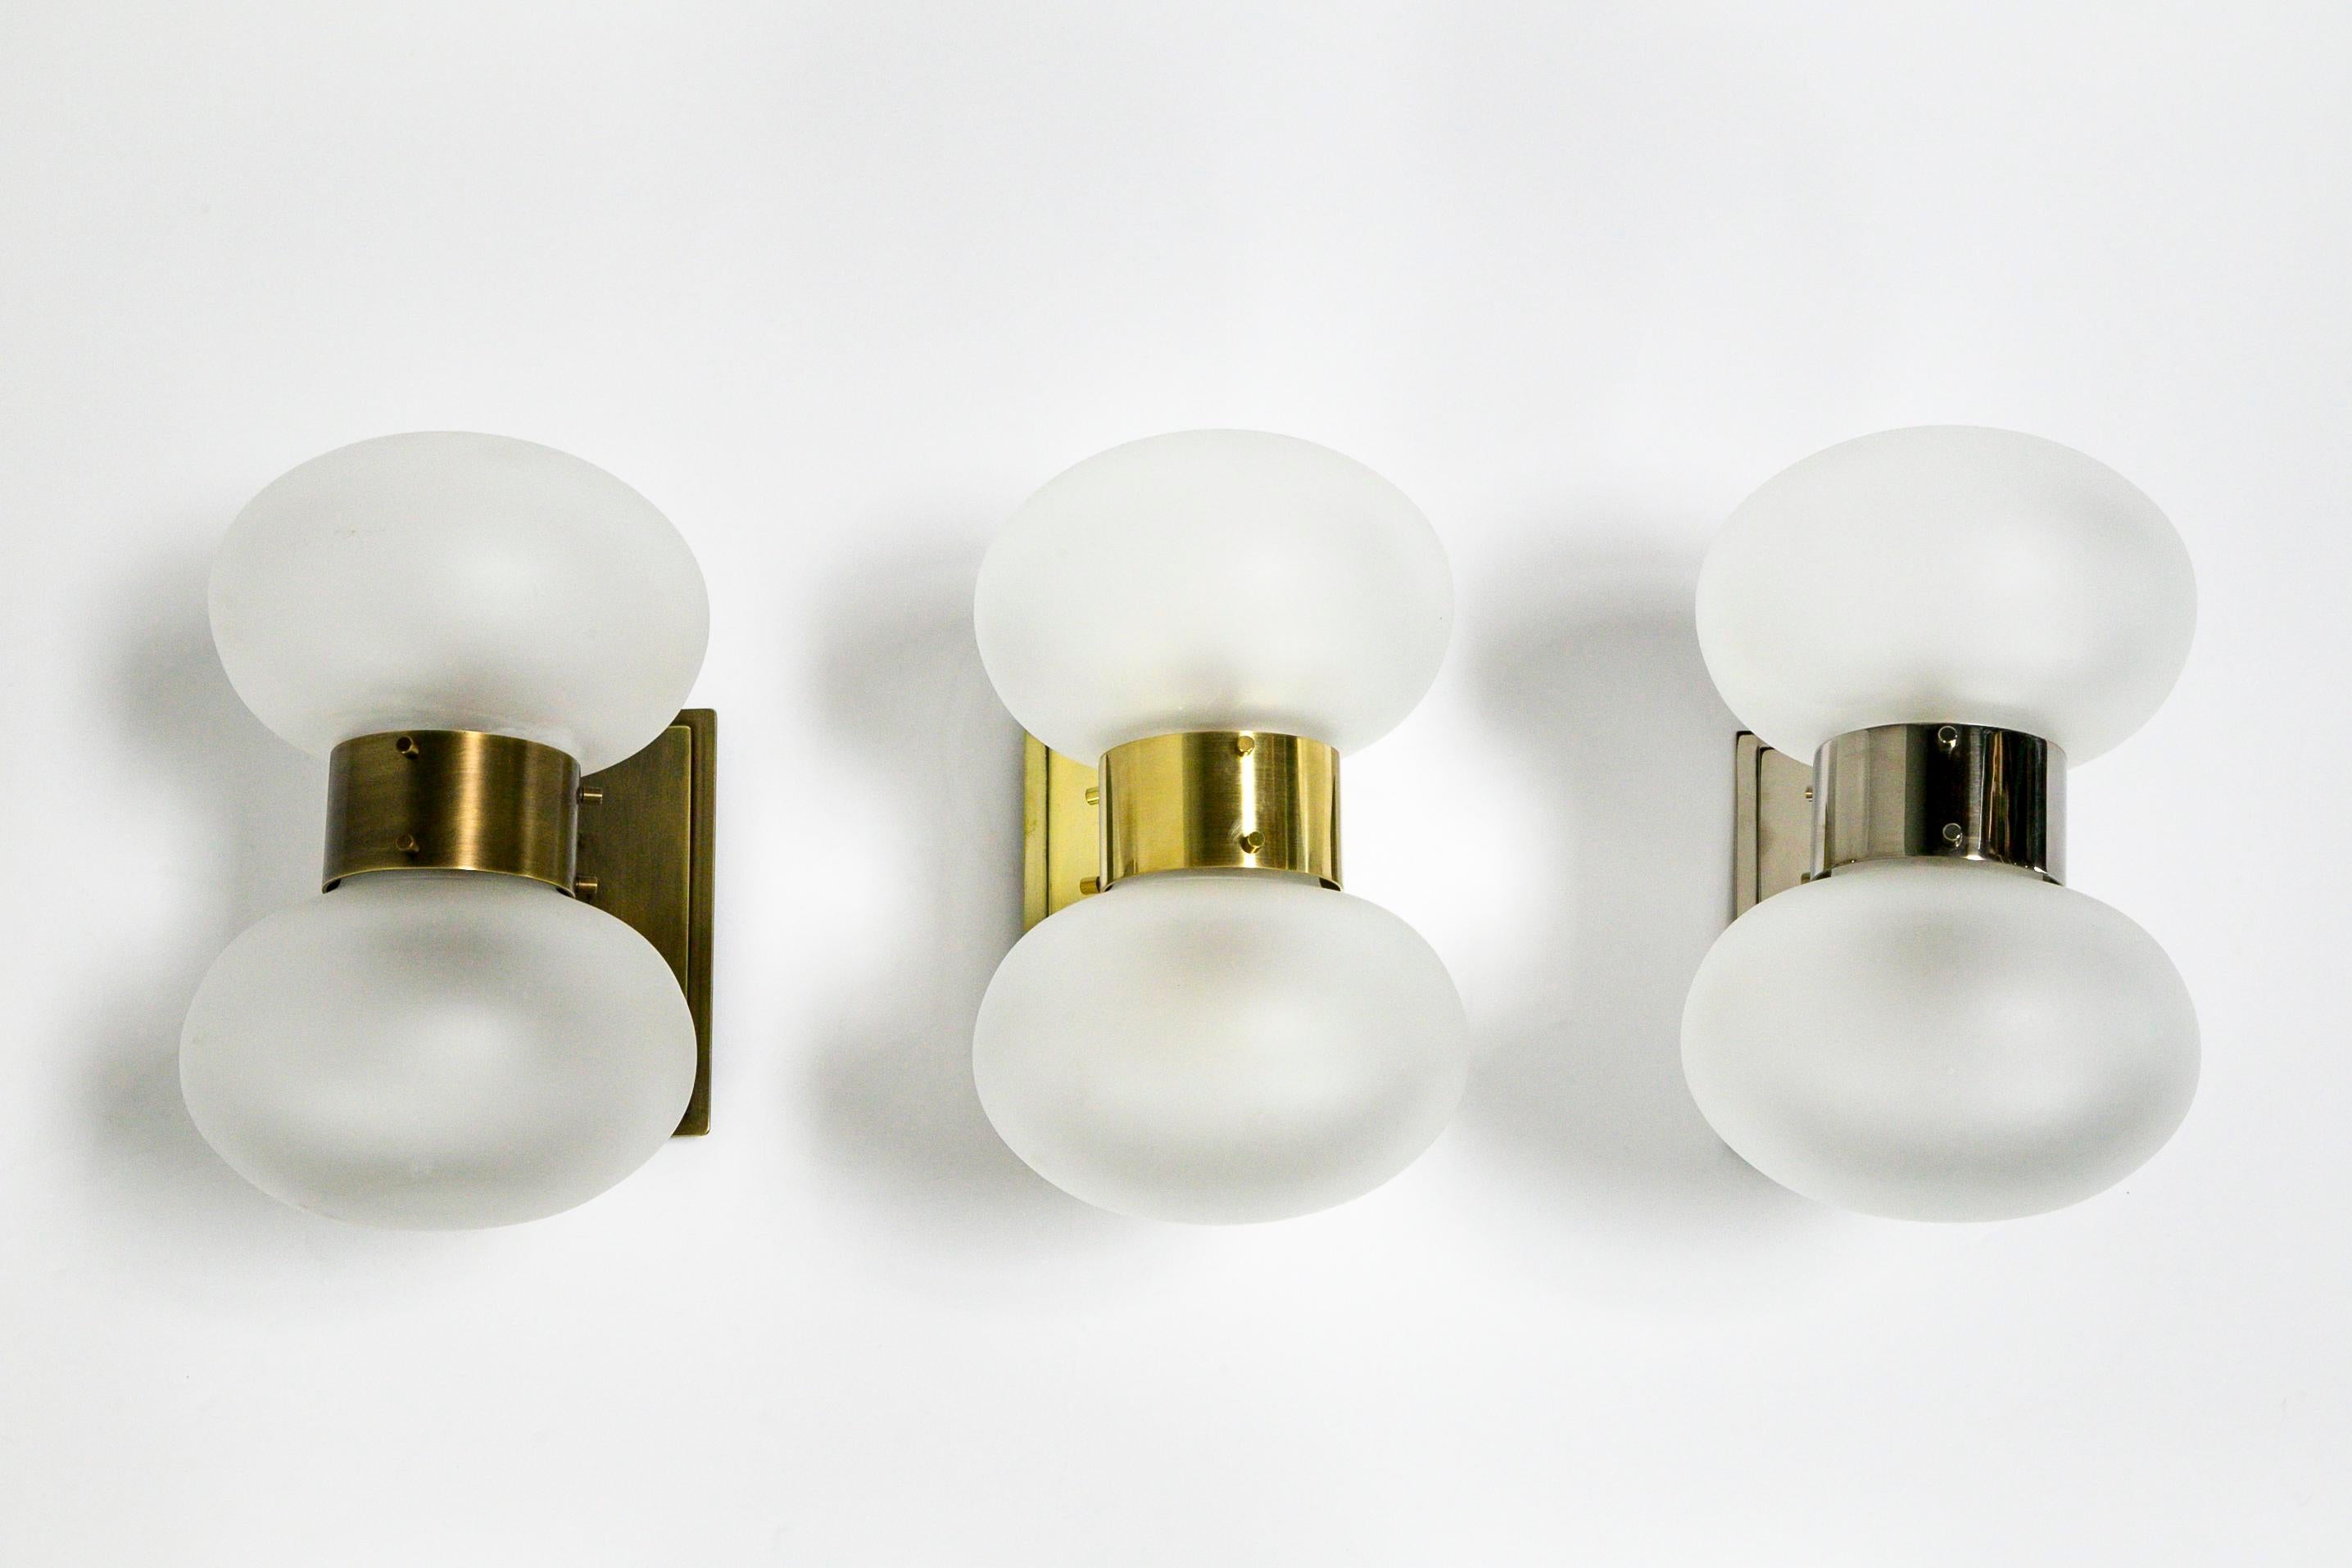 This handsome sconce features a beautifully unique frosted glass shape. The shade's round shape is contrasted with the geometric lines of the brass base and arm. It is having a sleek look with the stacked metal and covered screw details. The style